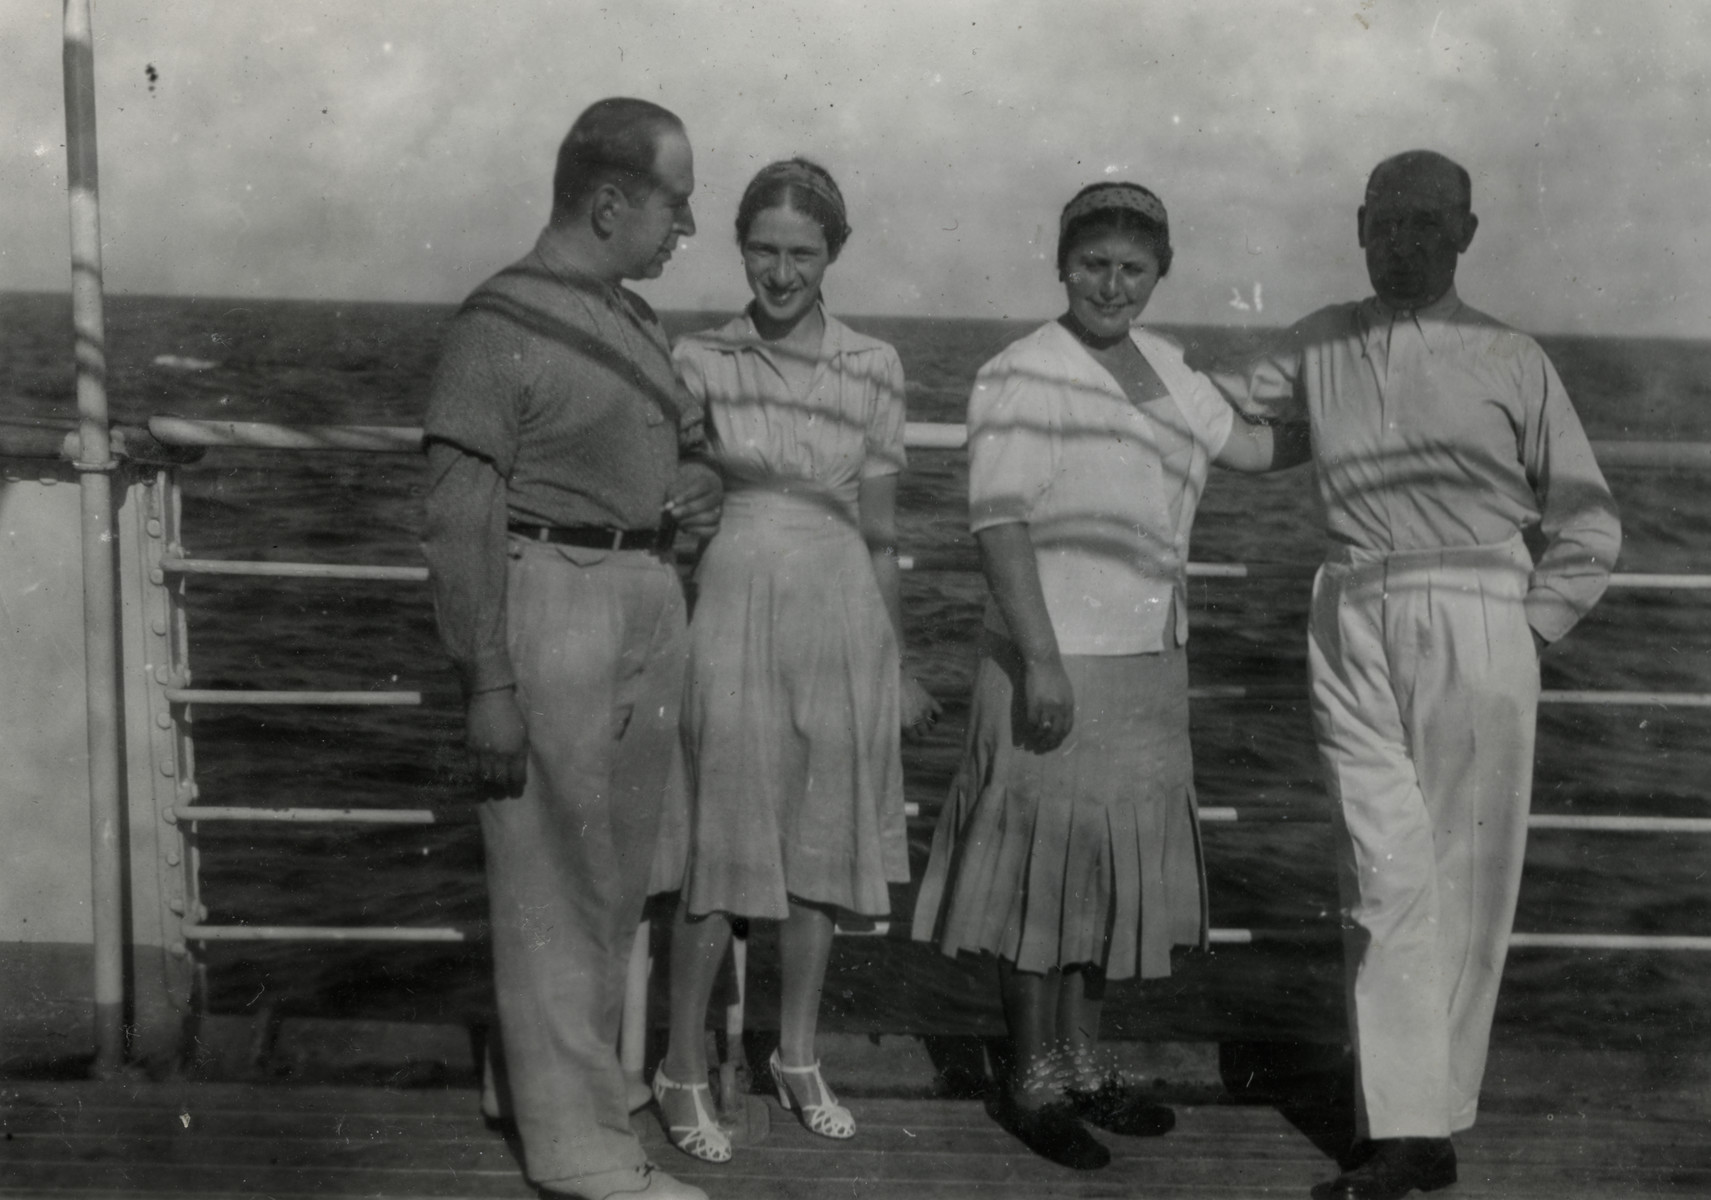 Refugees pose on the deck of a ship headed for Haita.

On the left are Herta and Walter Meinberg.